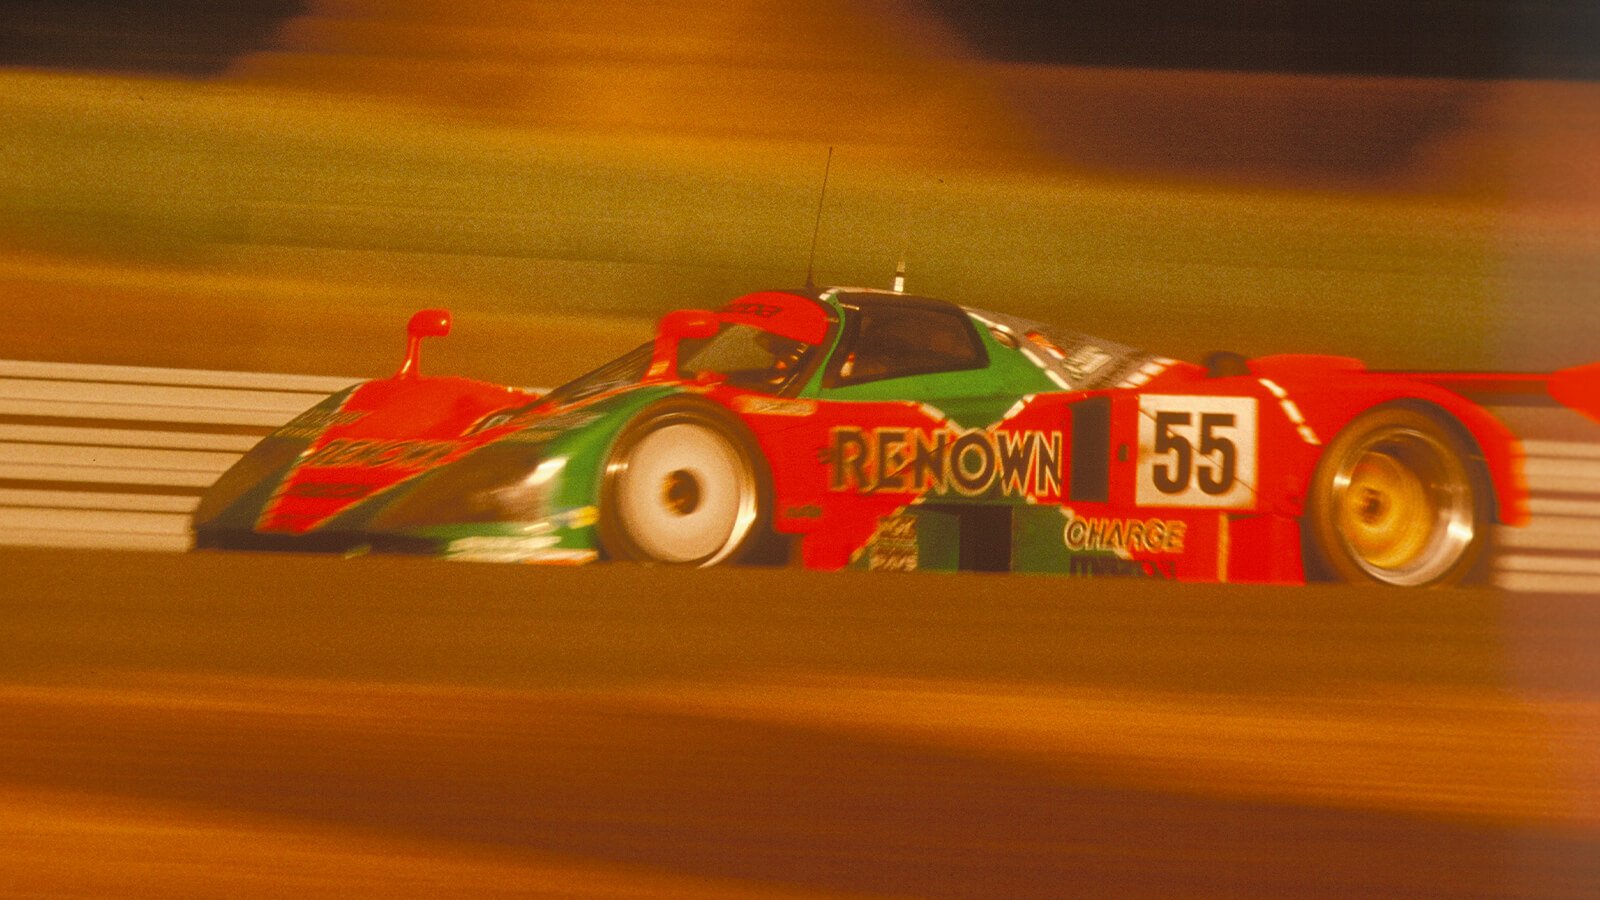 Mazda 787B No.55 racing car in red and green trim against a blurred background races at the Le Mans 24-Hour Endurance Race.